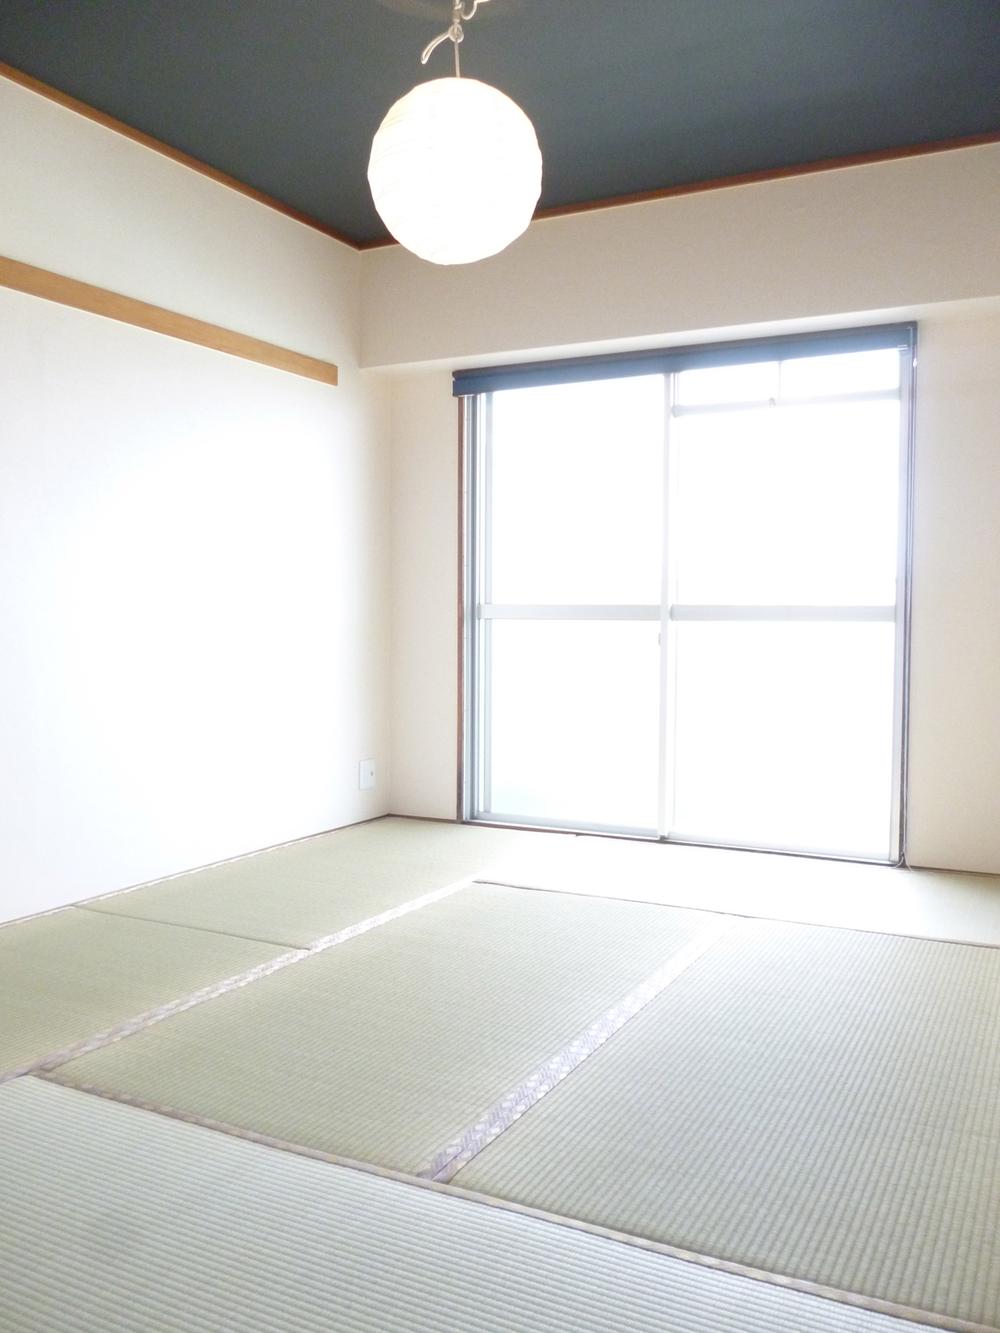 Non-living room. It is a Japanese-style room where there is calm